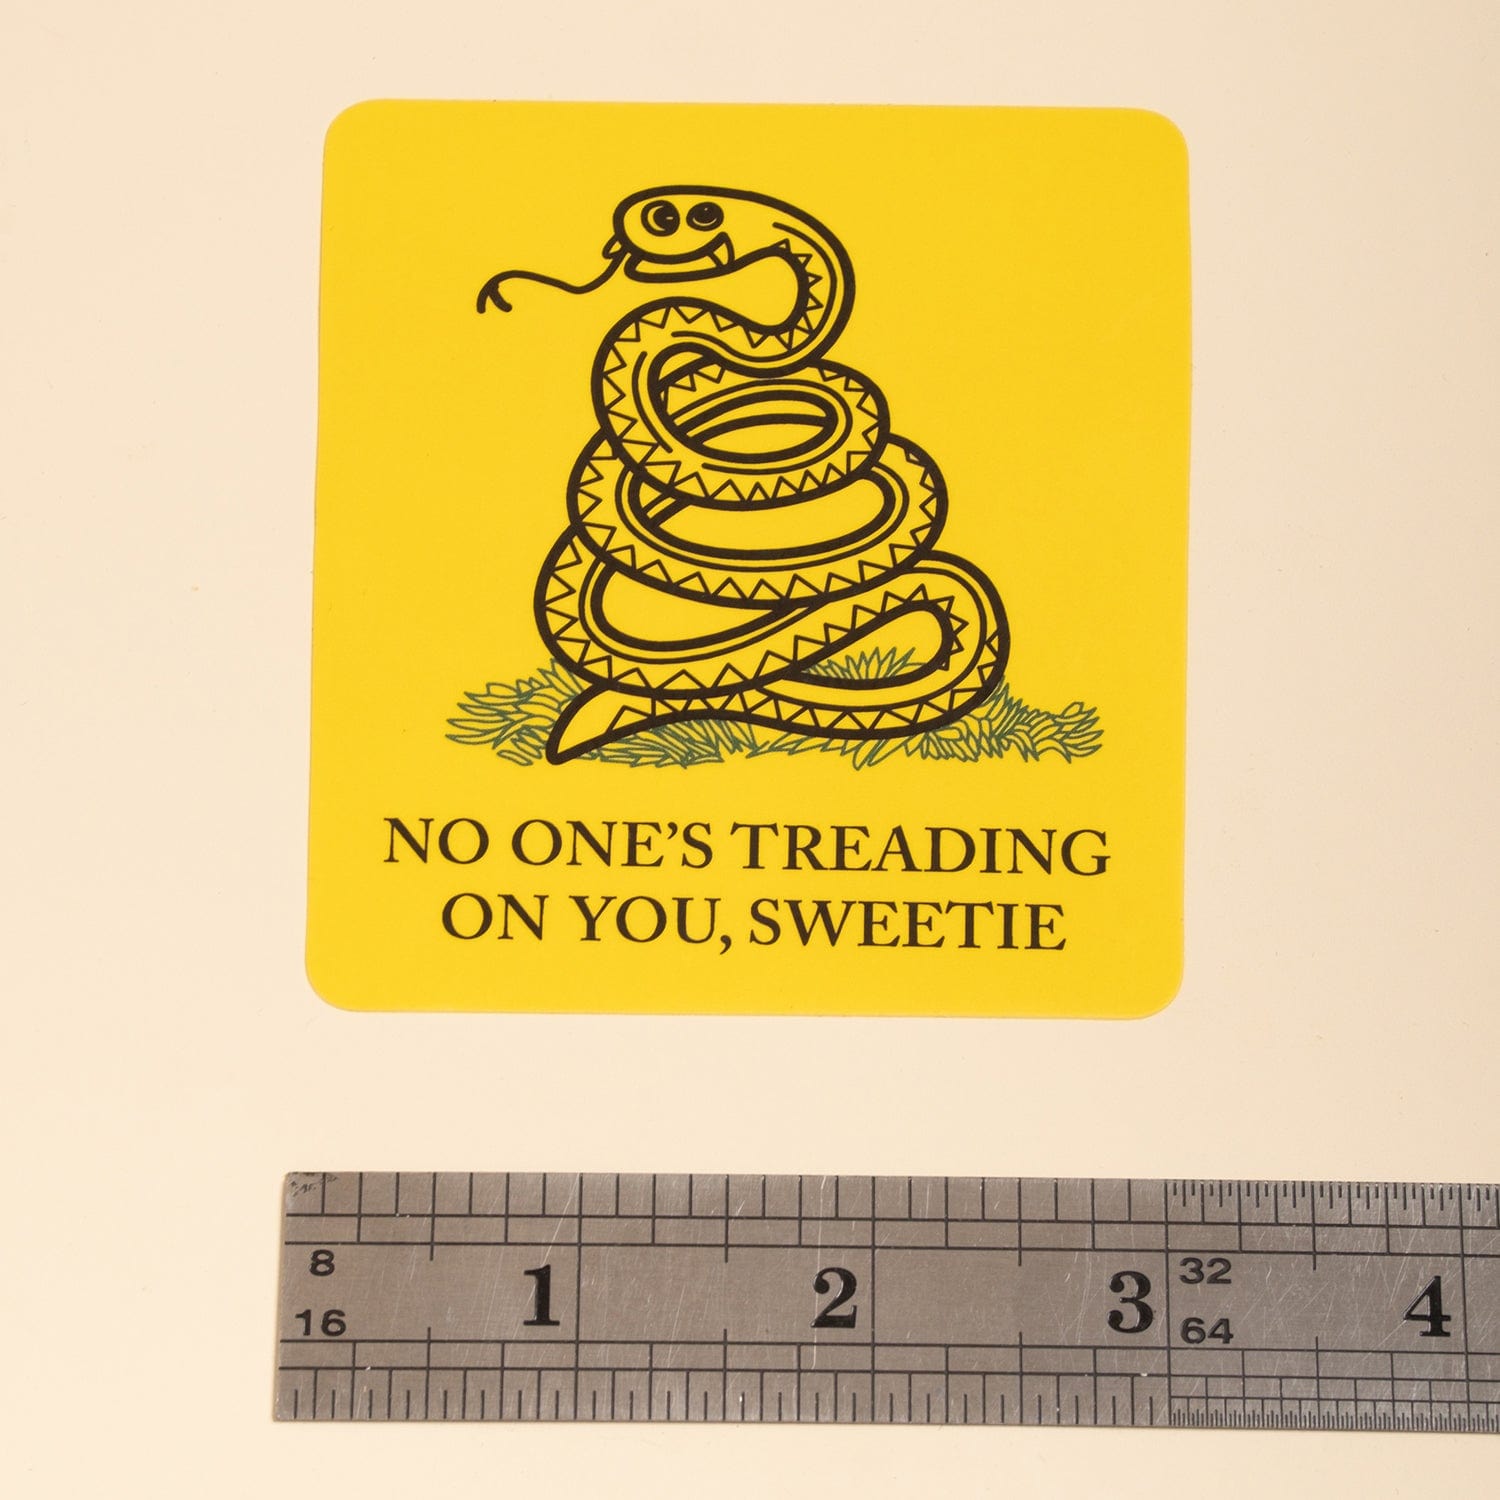 No One's Treading On You, Sweetie - Sticker